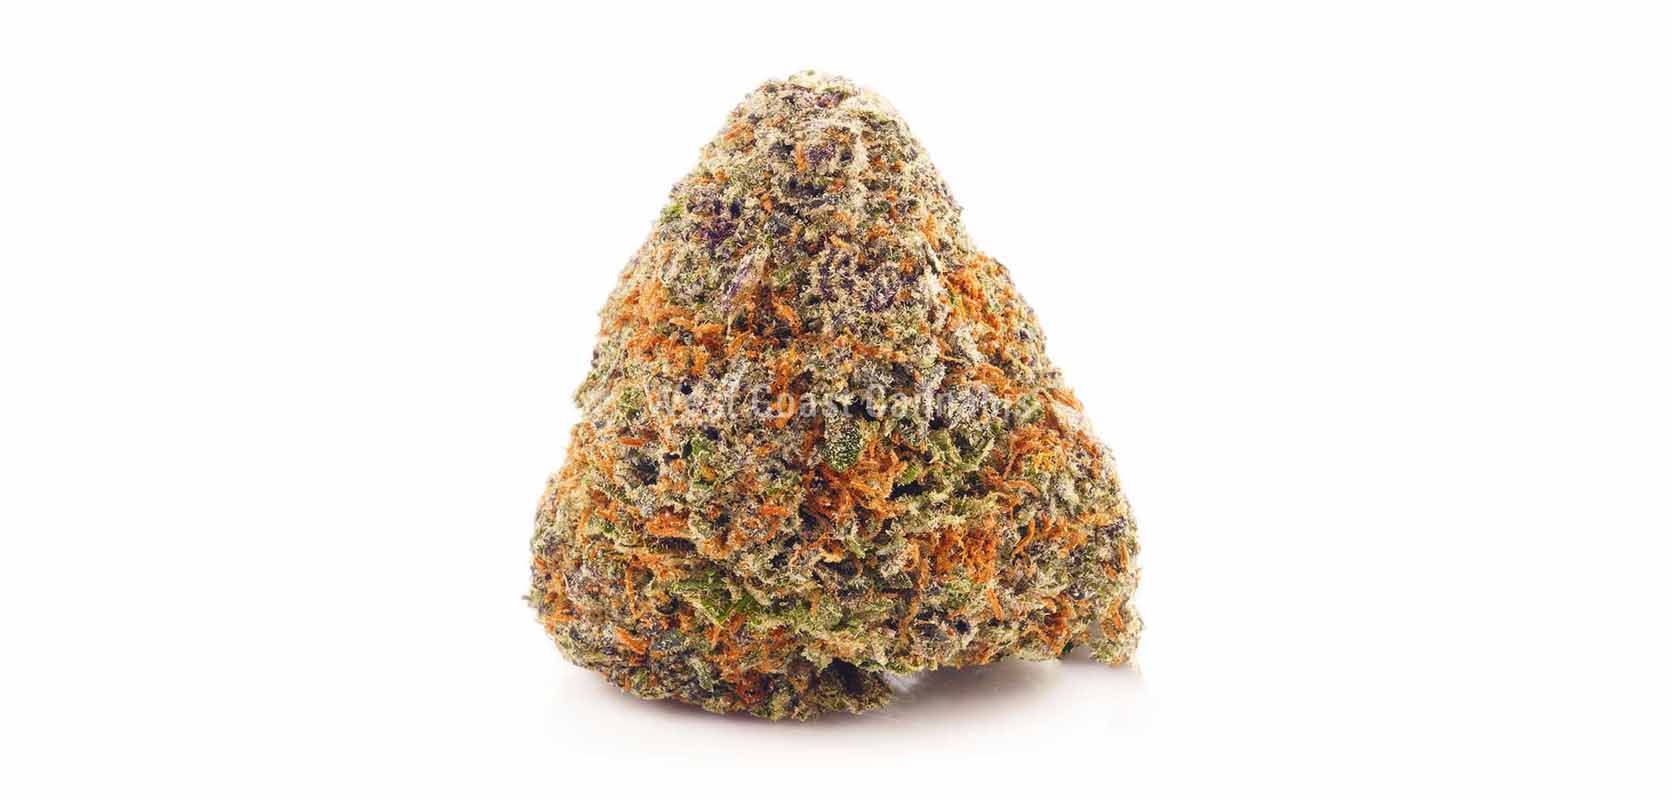 Fruity Pebbles weed online Canada. Cheapweed value buds and weed deals from wccannabis online dispensary Canada.